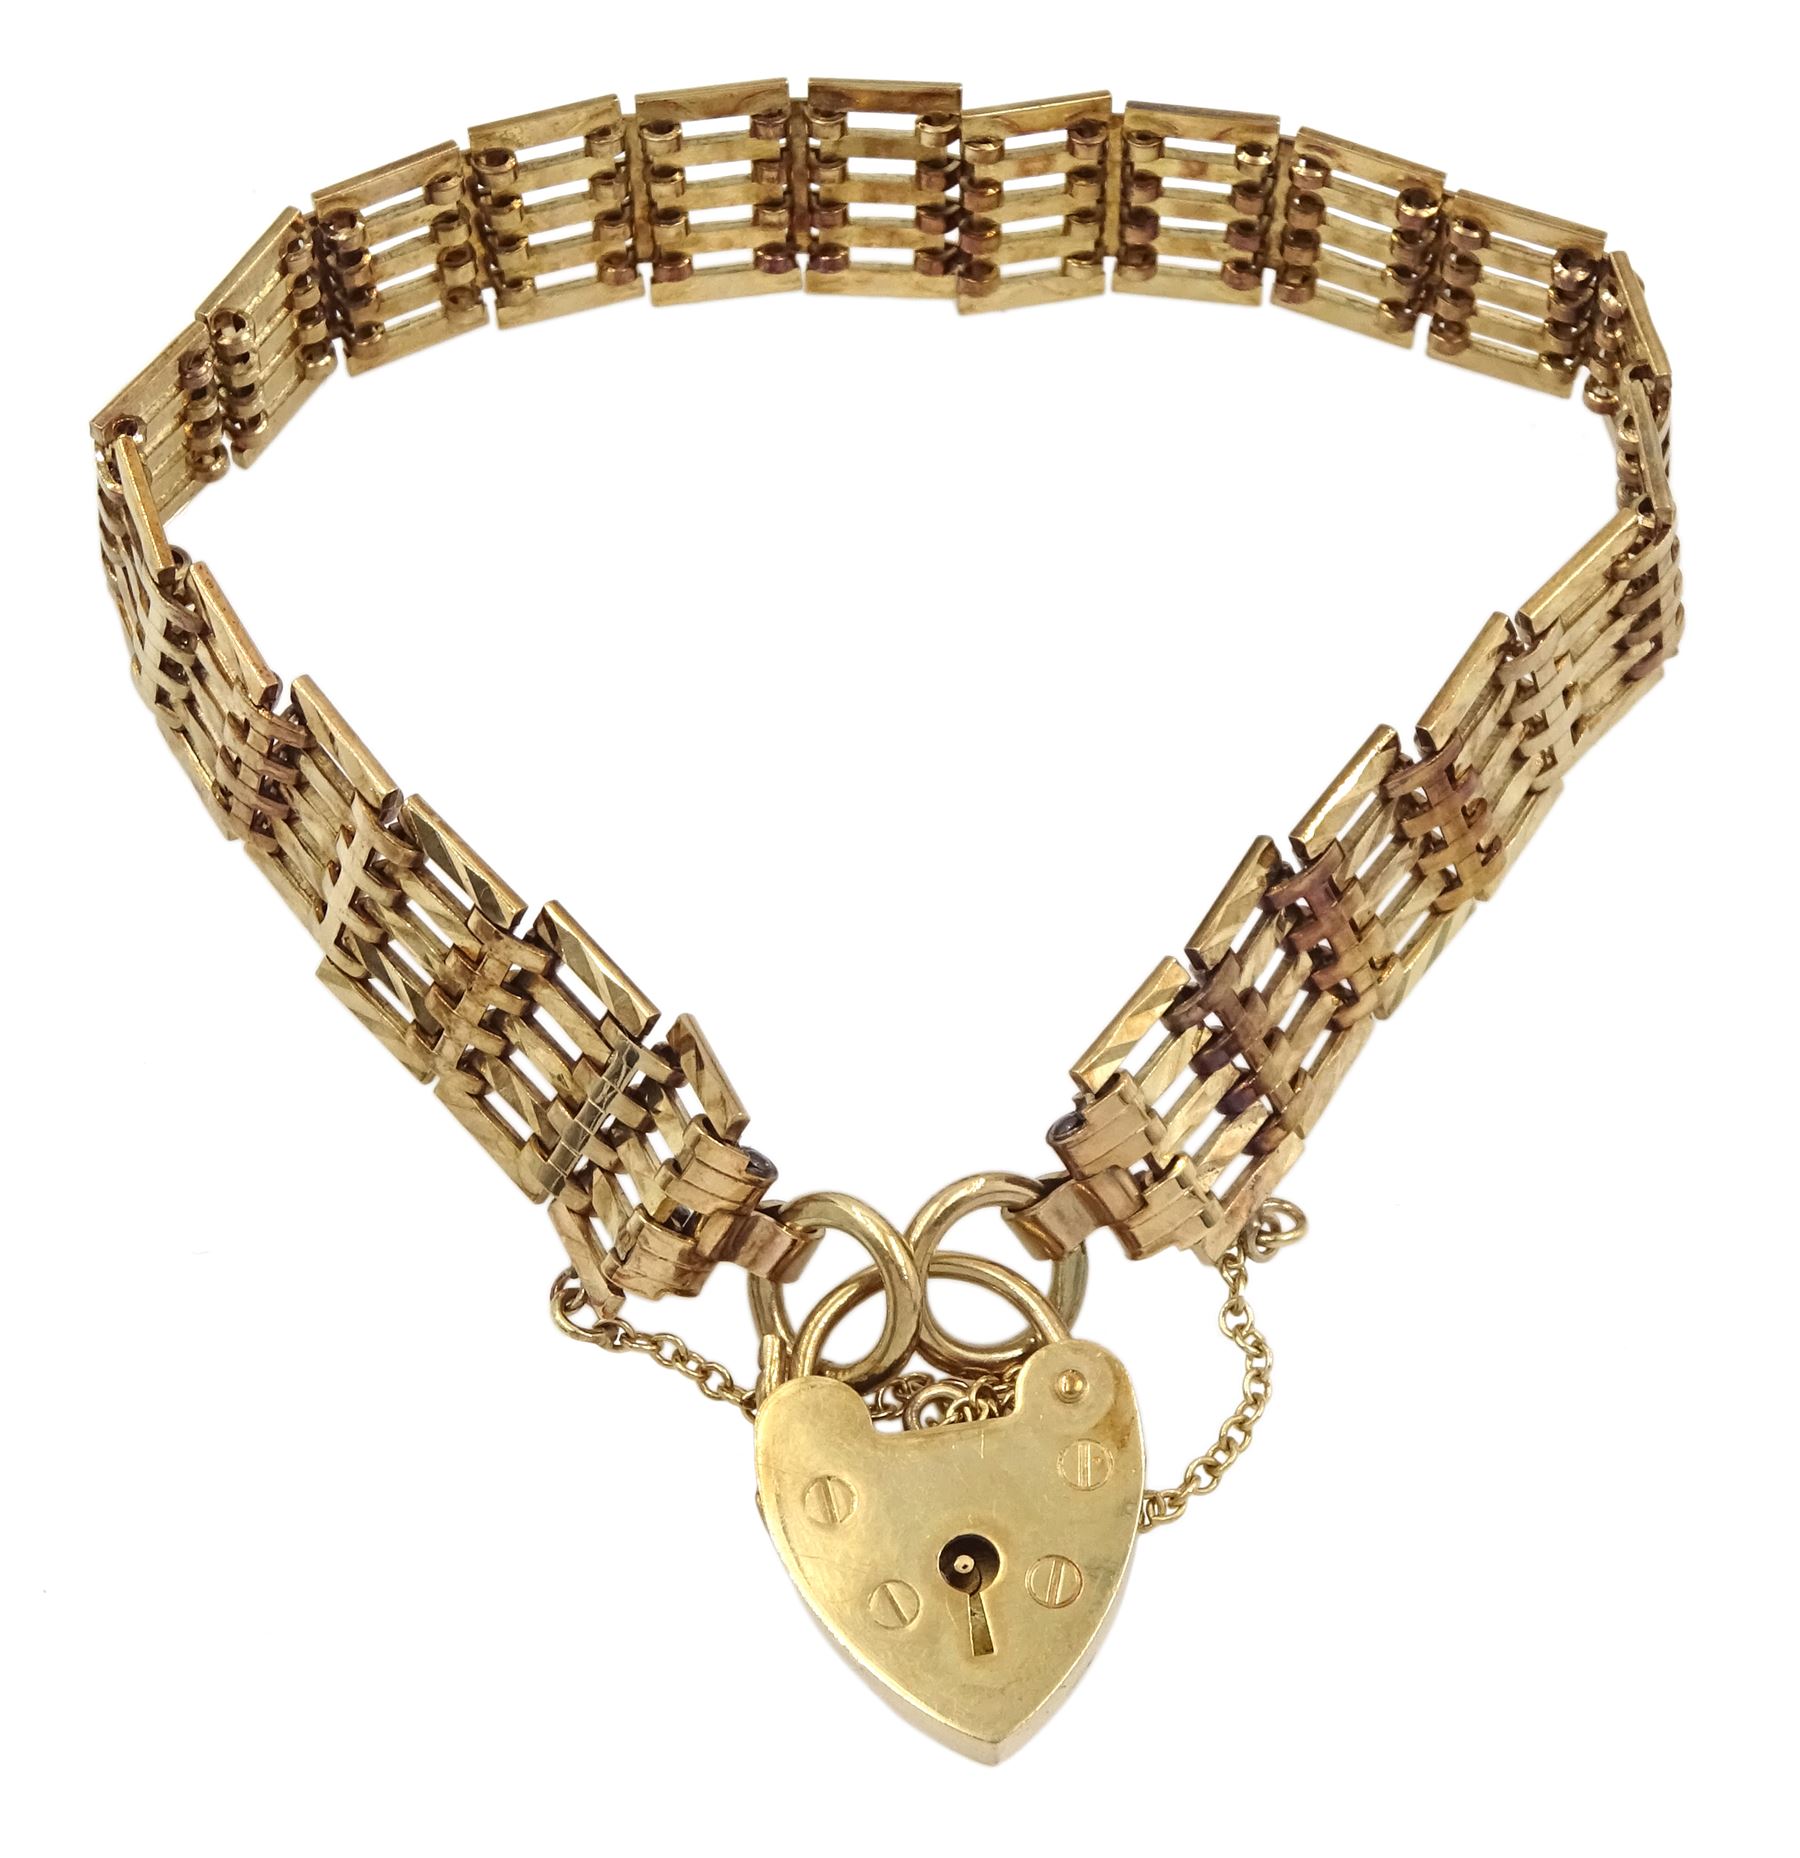 9ct gold five bar gate bracelet with heart locket clasp